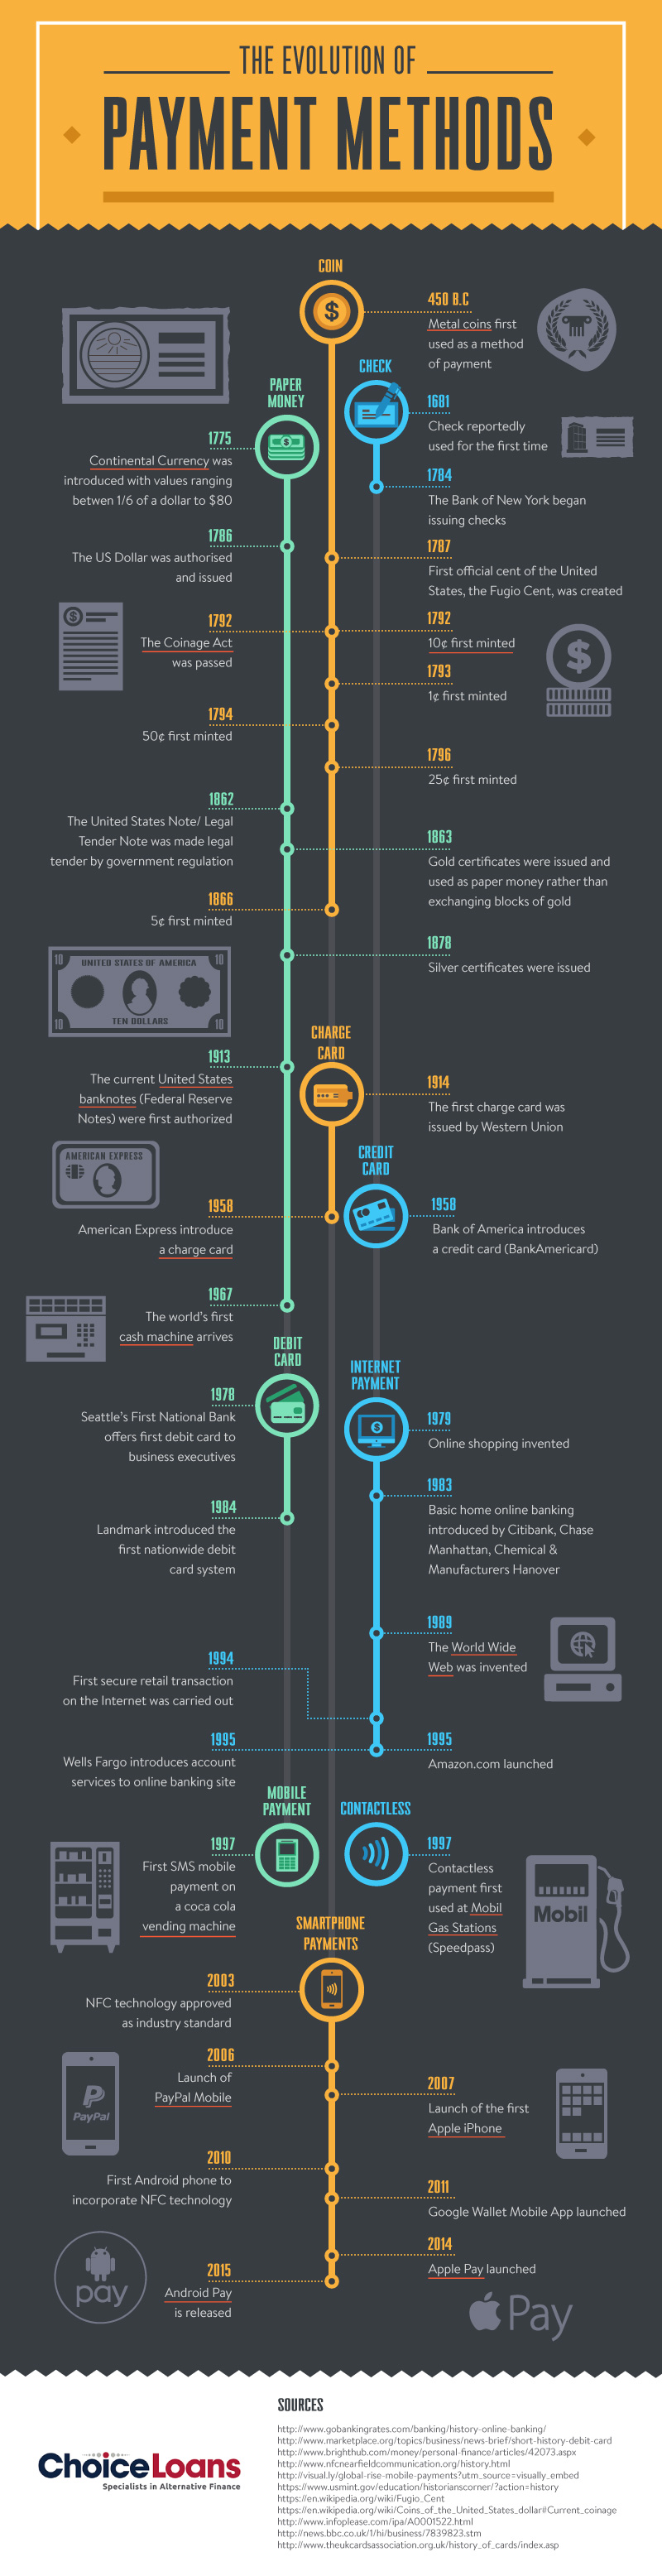 The Evolution of Payment Methods